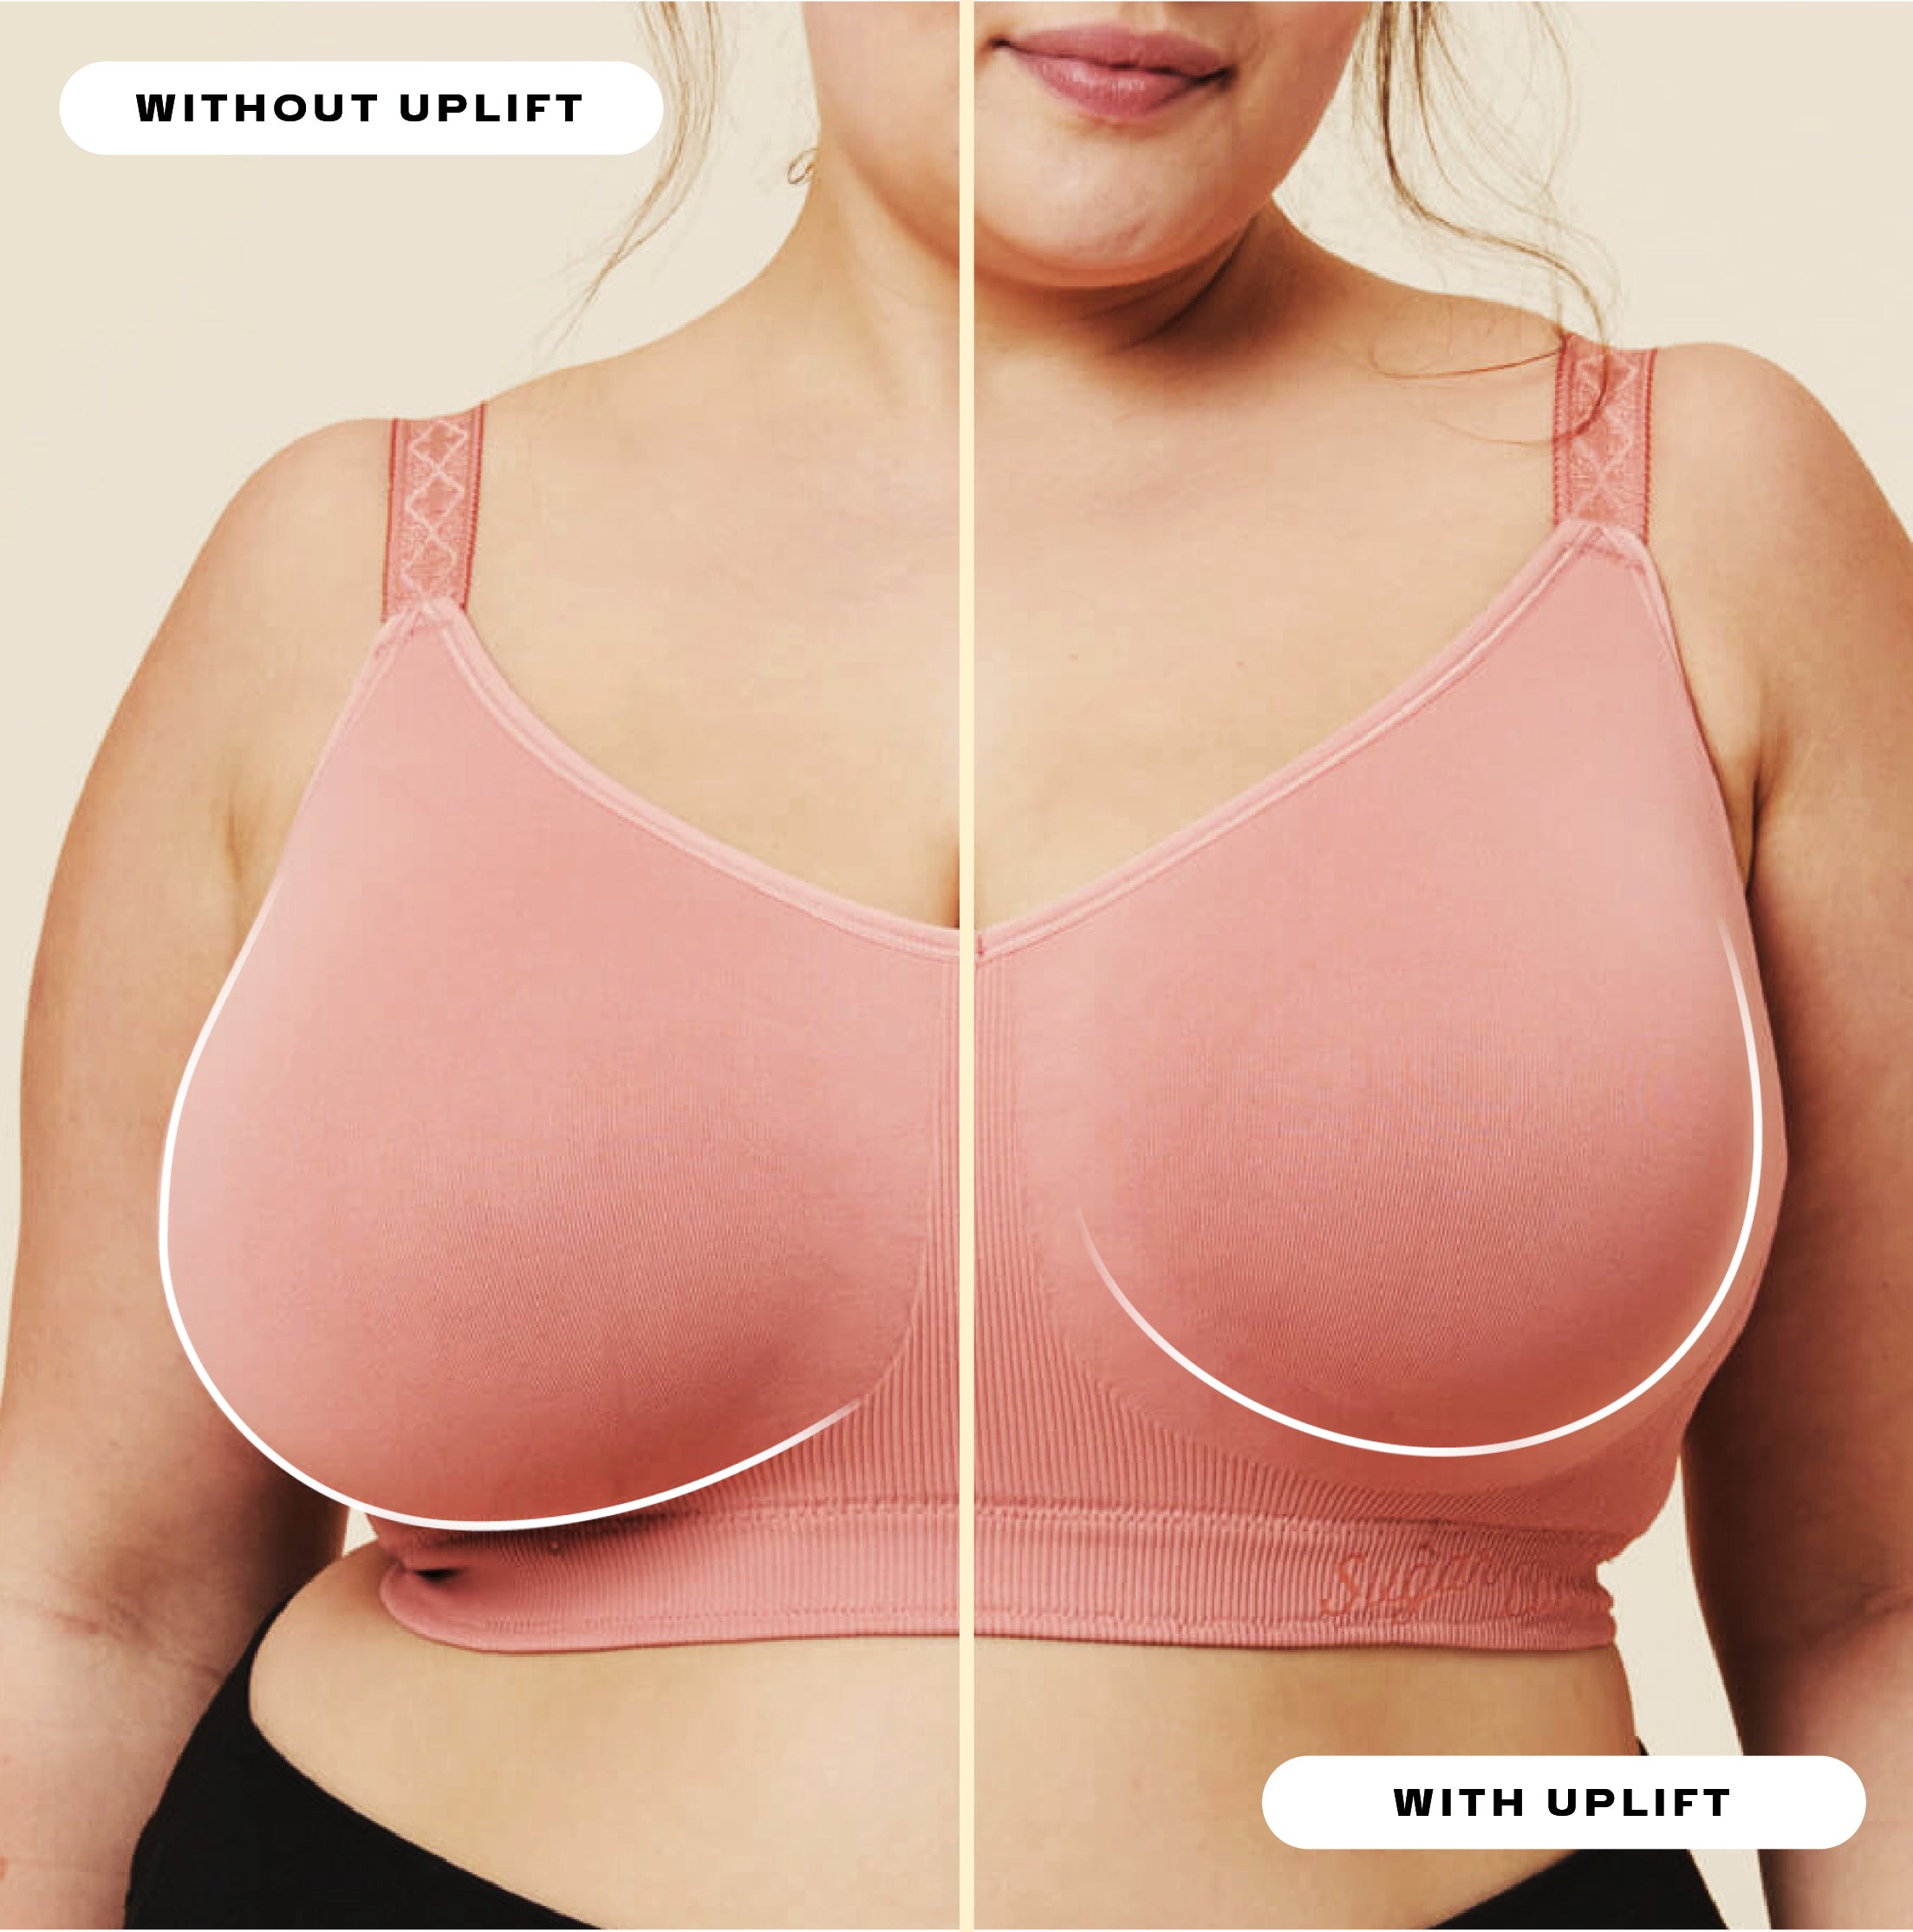 27 Different Types of Breast Shapes & Sizes